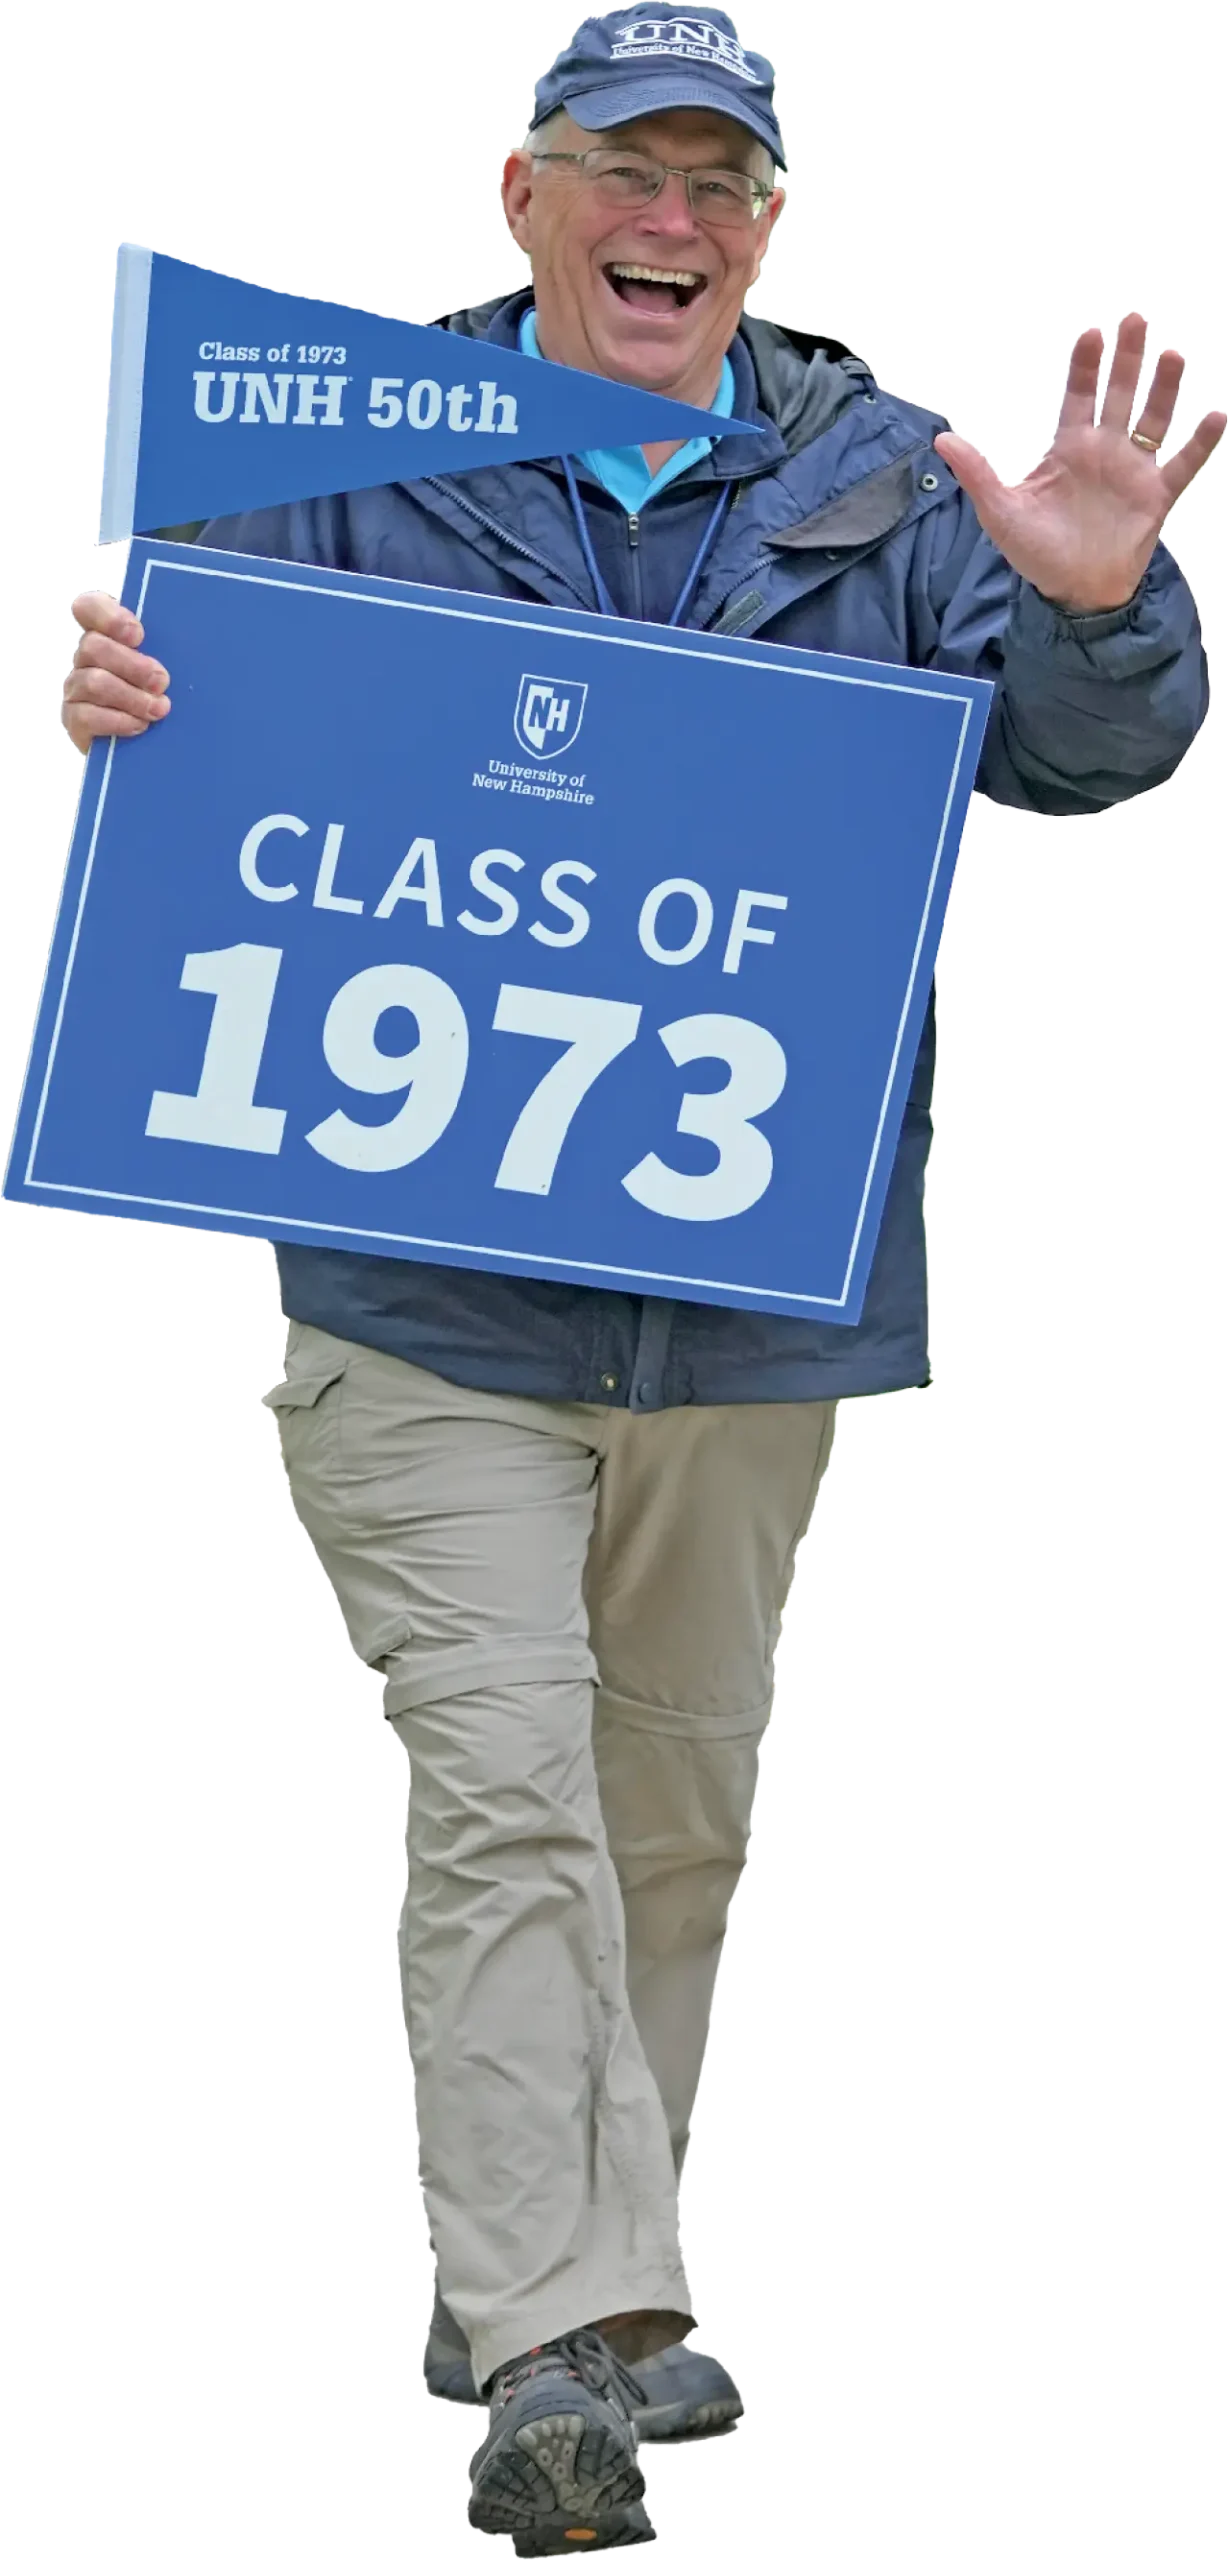 Man holding up class of 1973 sign